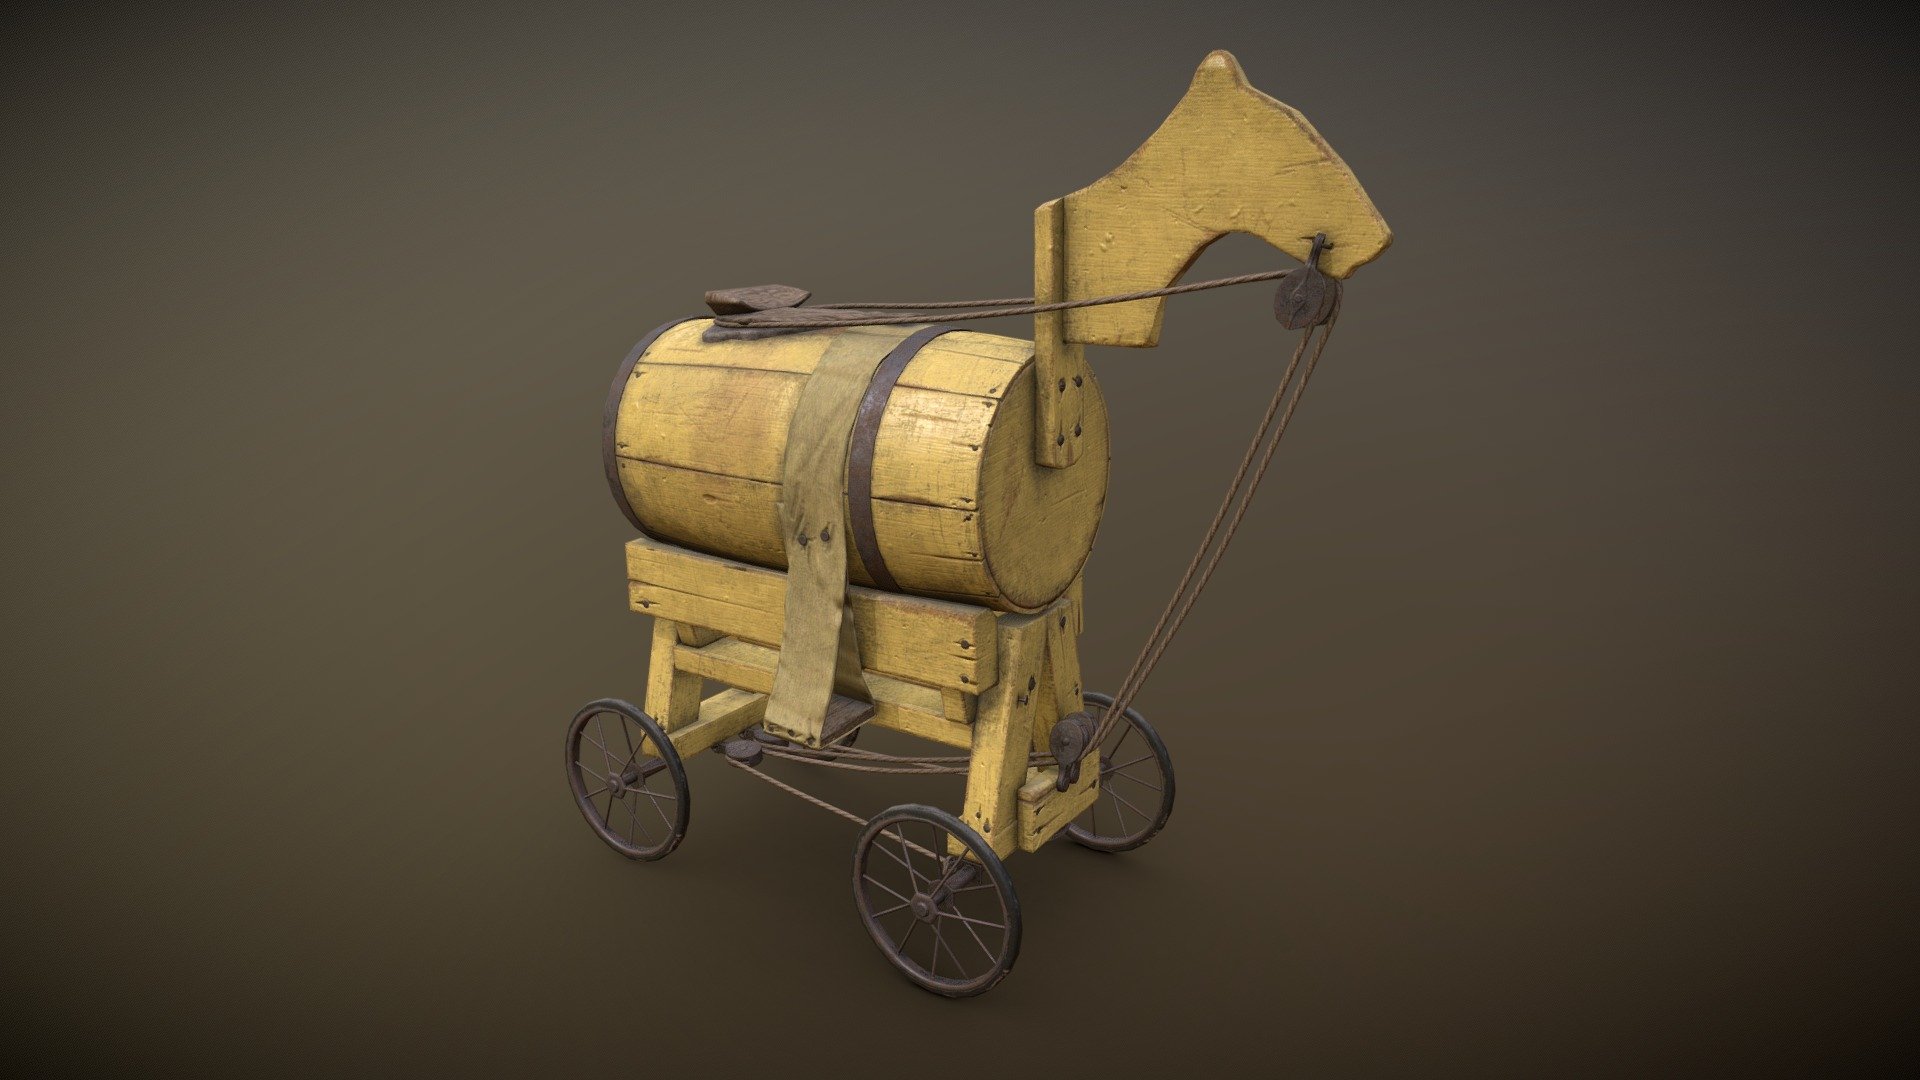 Mechanical horse toy